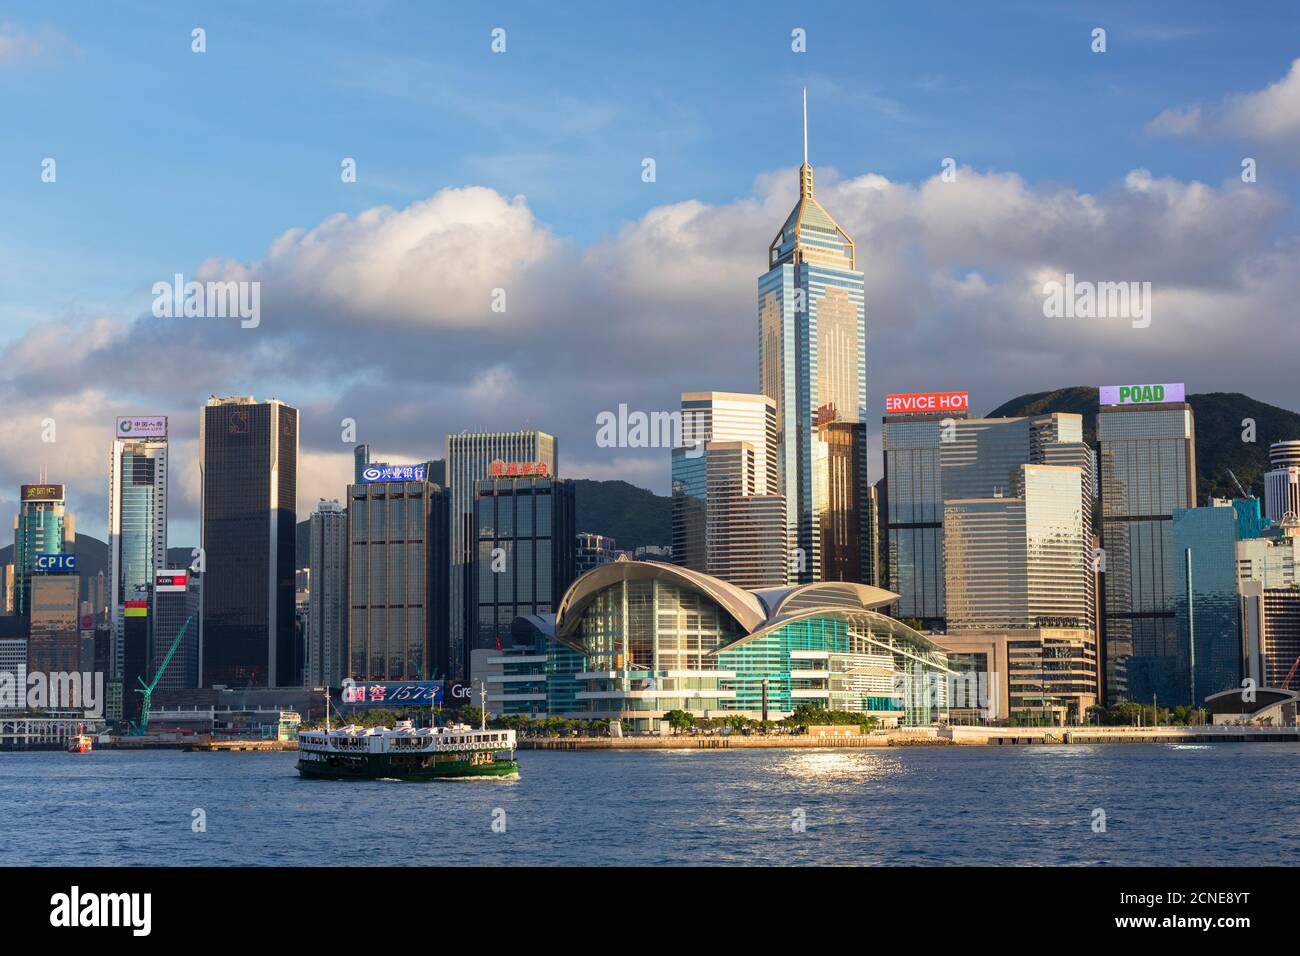 Star Ferry in Victoria Harbour with skyscrapers of Wan Chai, Hong Kong, China, Asia Stock Photo